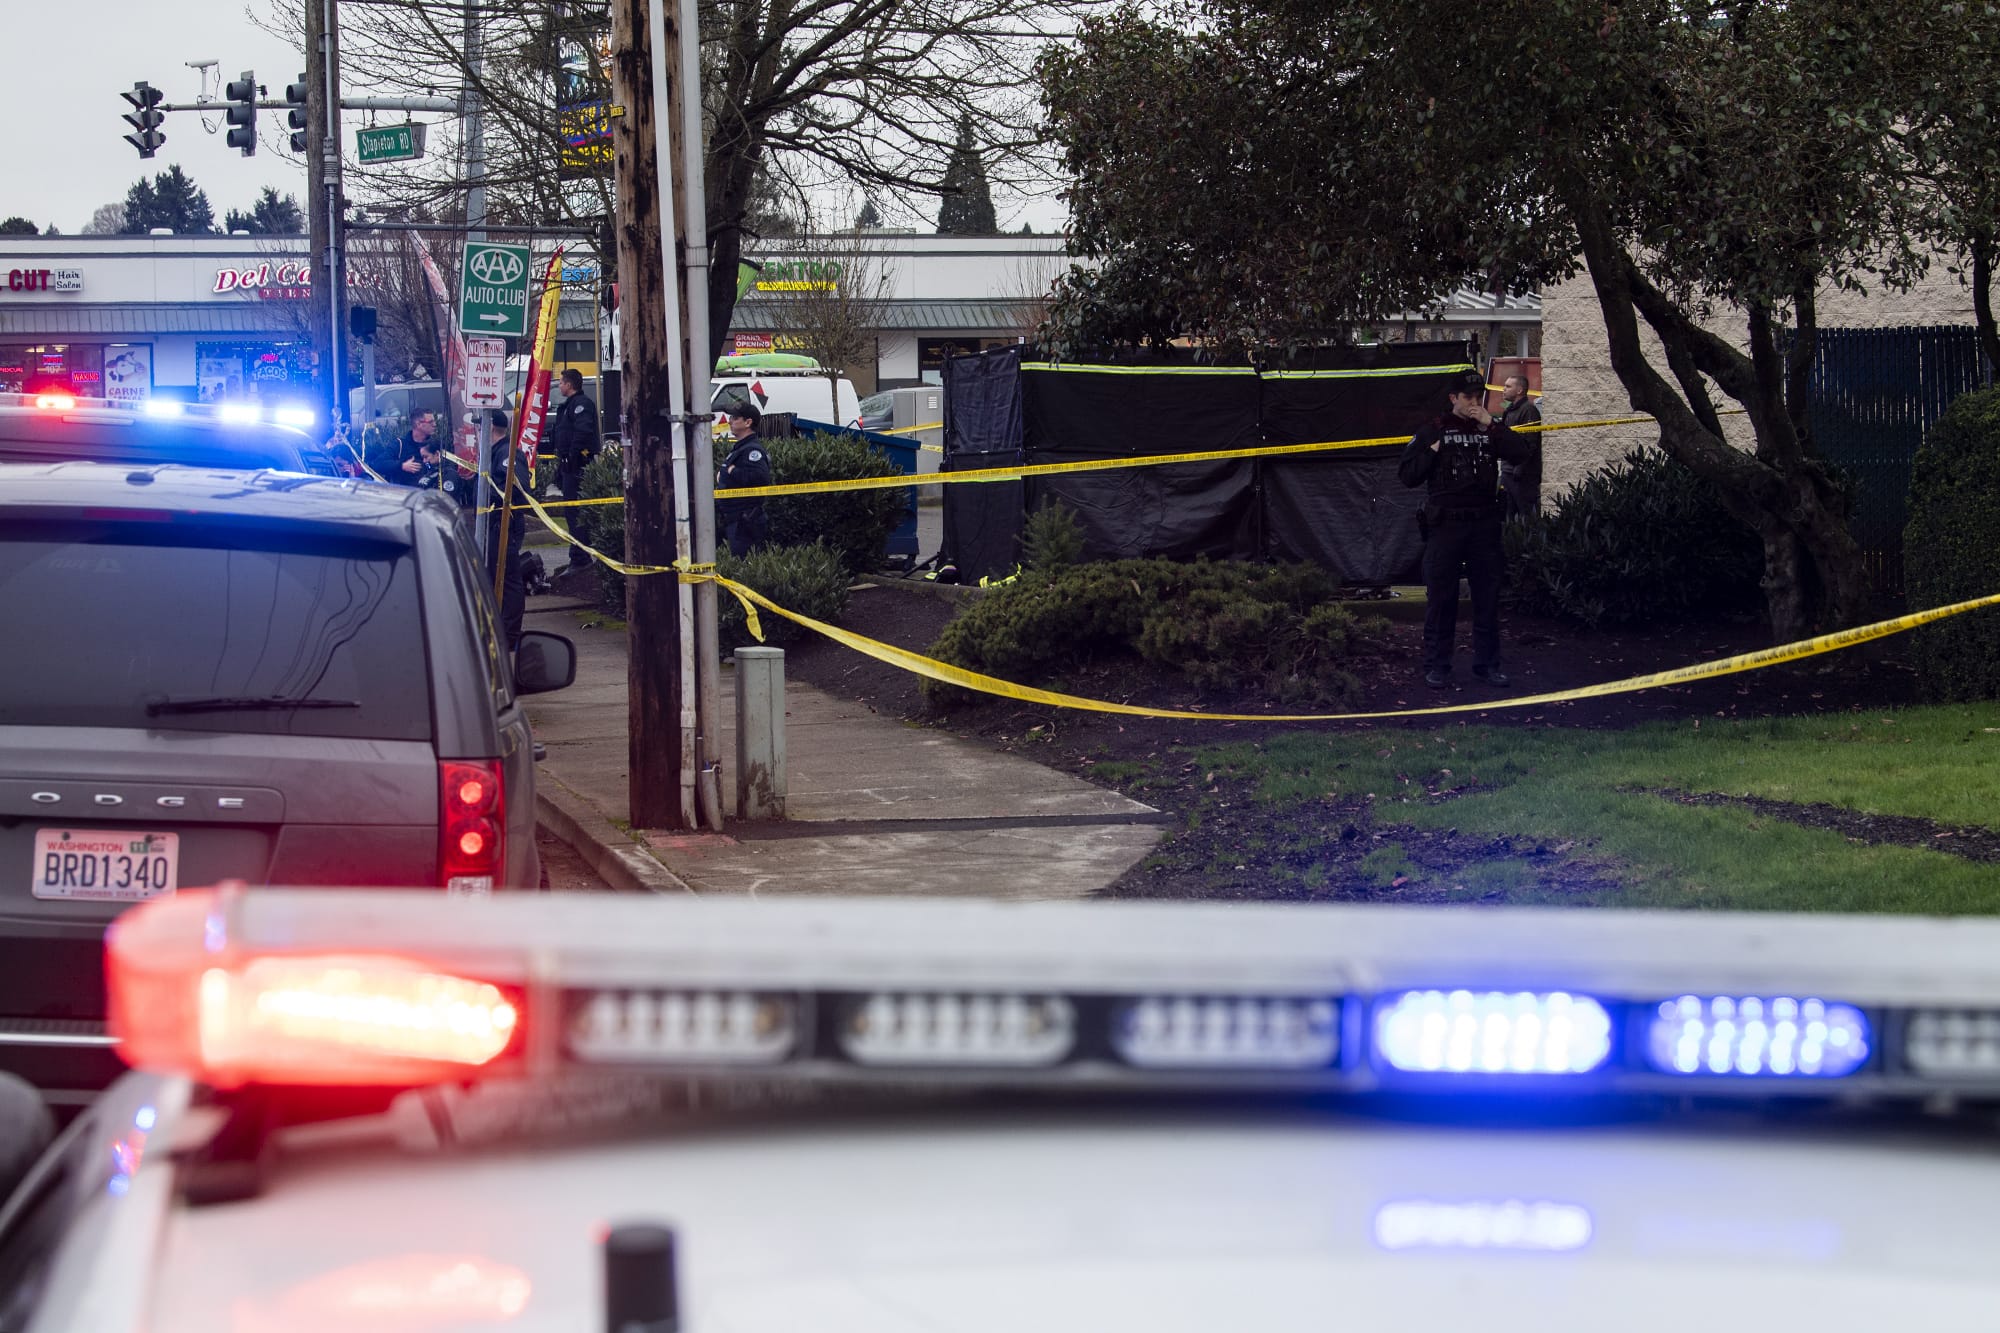 Vancouver police investigate a fatal shooting at Stapleton Road and Fourth Plain Boulevard in central Vancouver on Feb. 4, 2020. A young man was shot and killed. The victim's identity has not been released.